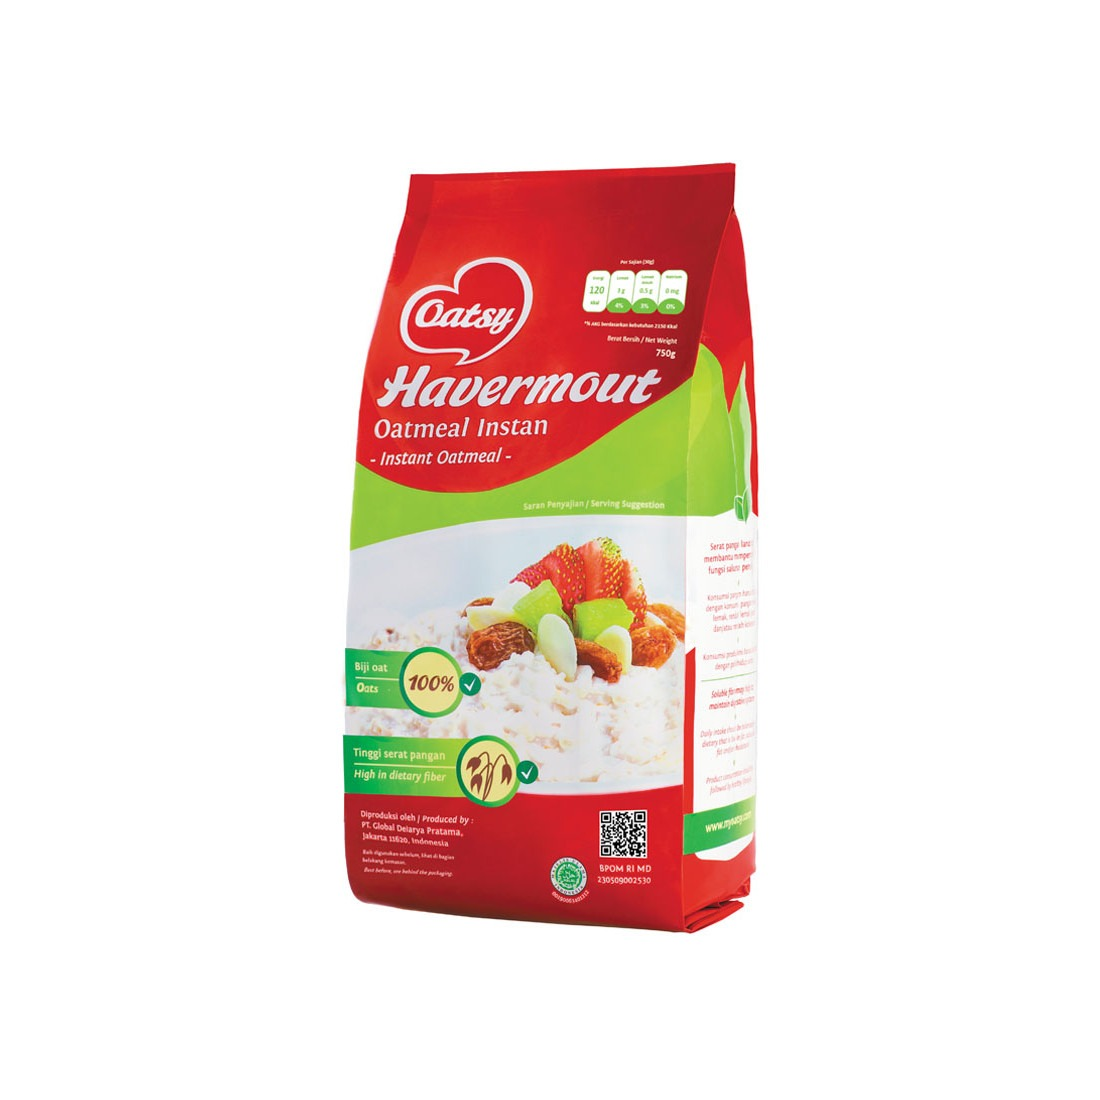 Oatsy 750g Havermout Instant Oatmeal